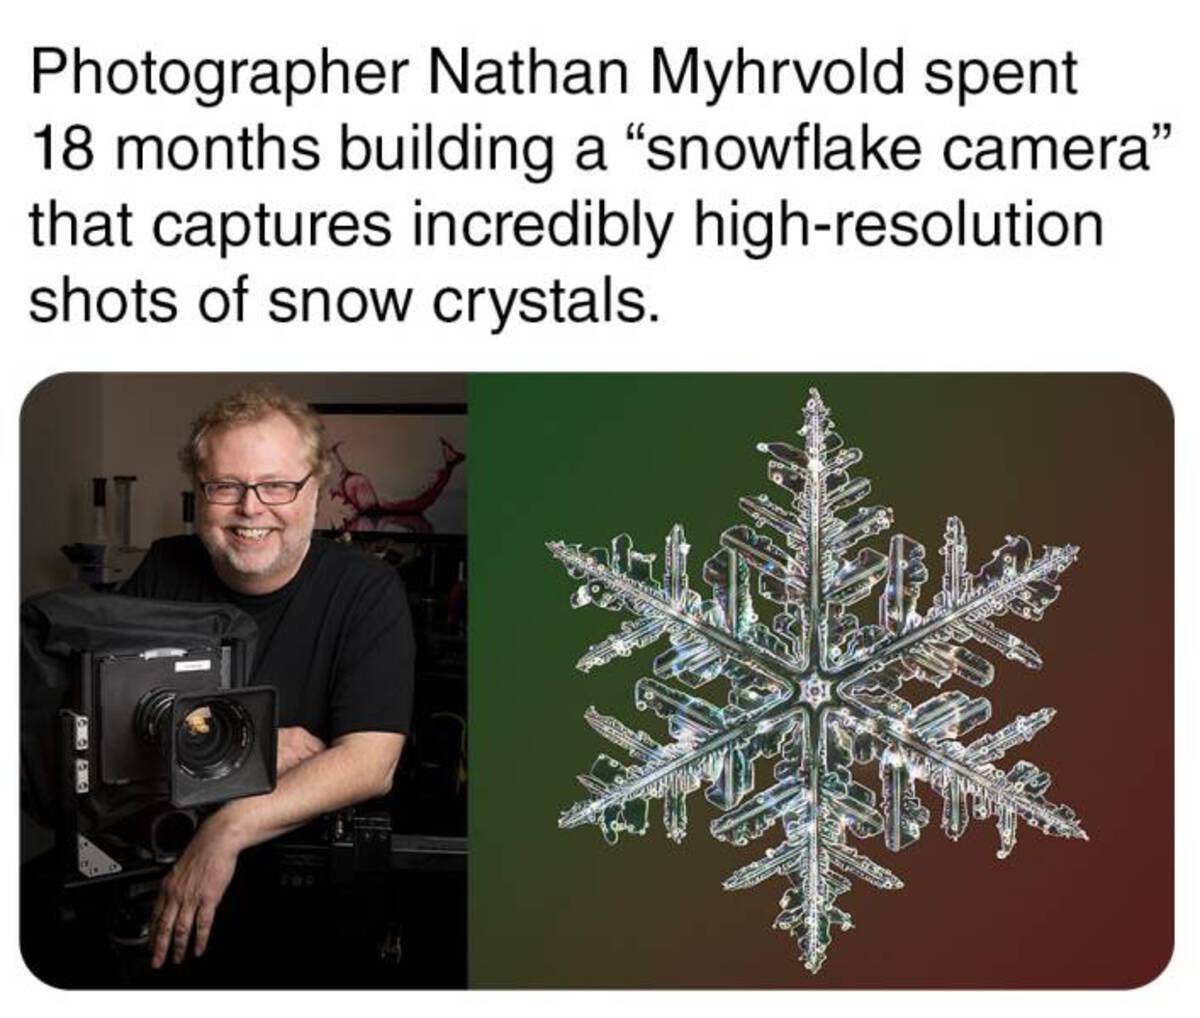 real snowflakes - Photographer Nathan Myhrvold spent 18 months building a "snowflake camera" that captures incredibly highresolution shots of snow crystals.